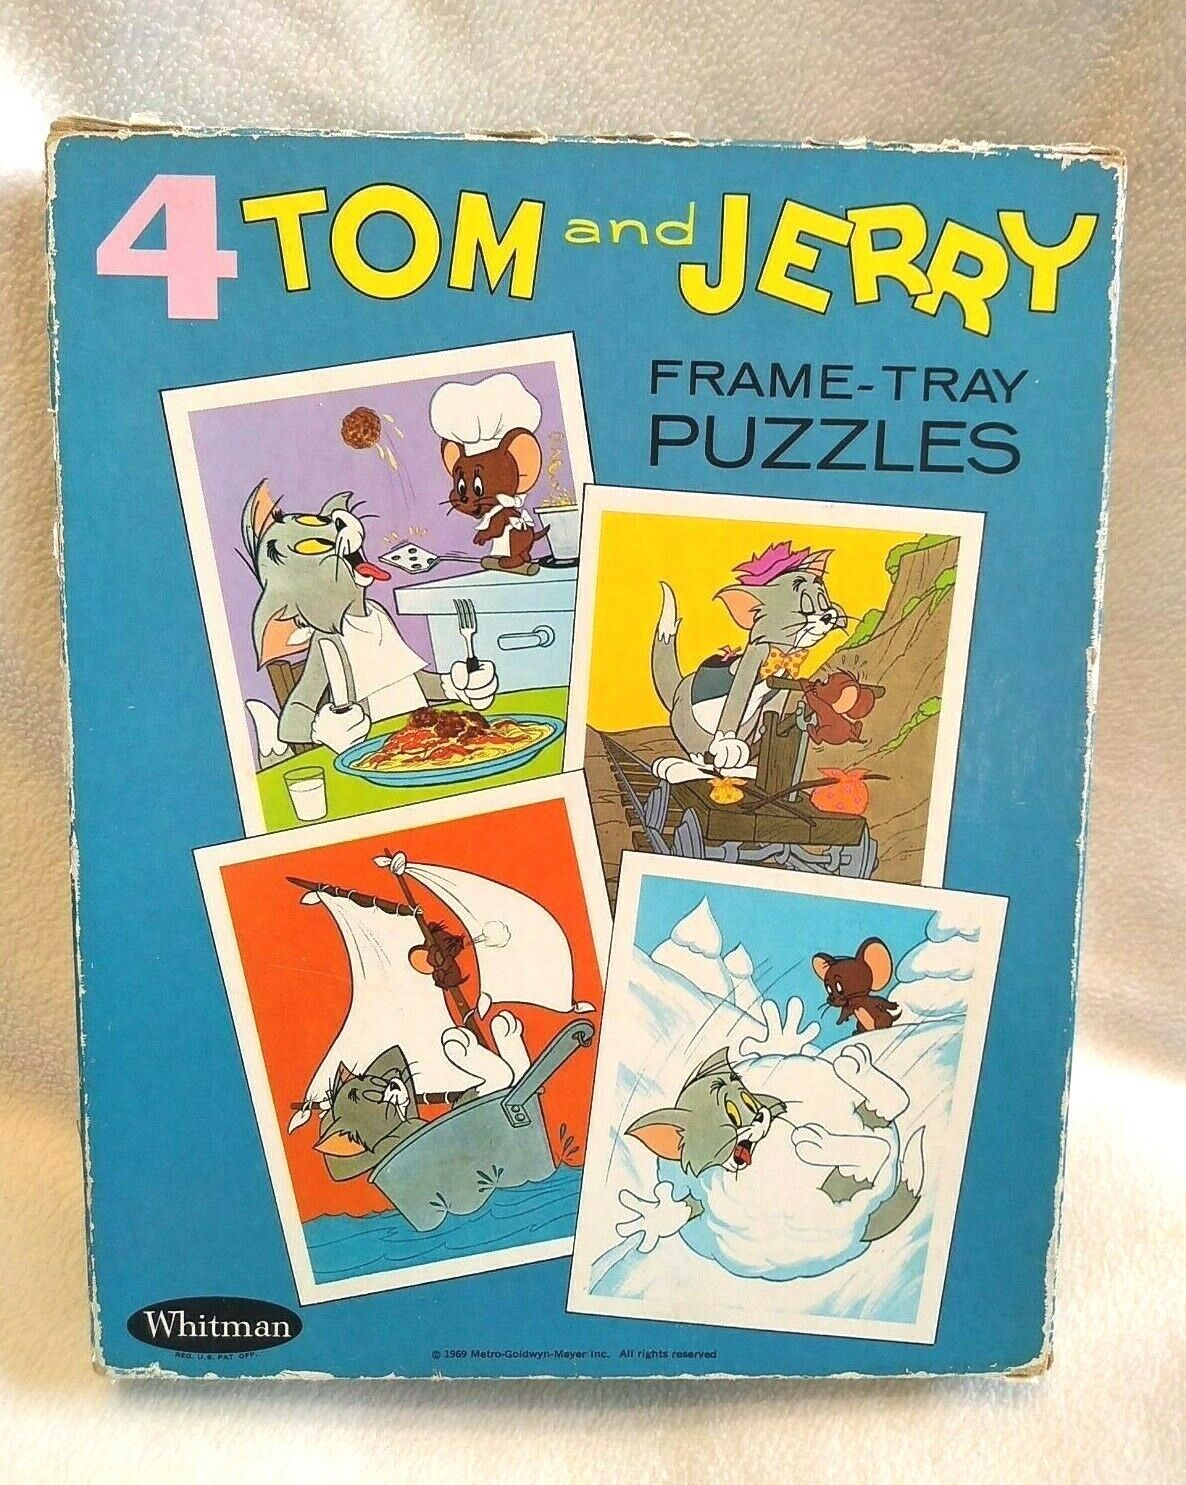 Vintage Whitman 4 TOM and JERRY FRAME-TRAY PUZZLES  # 4792